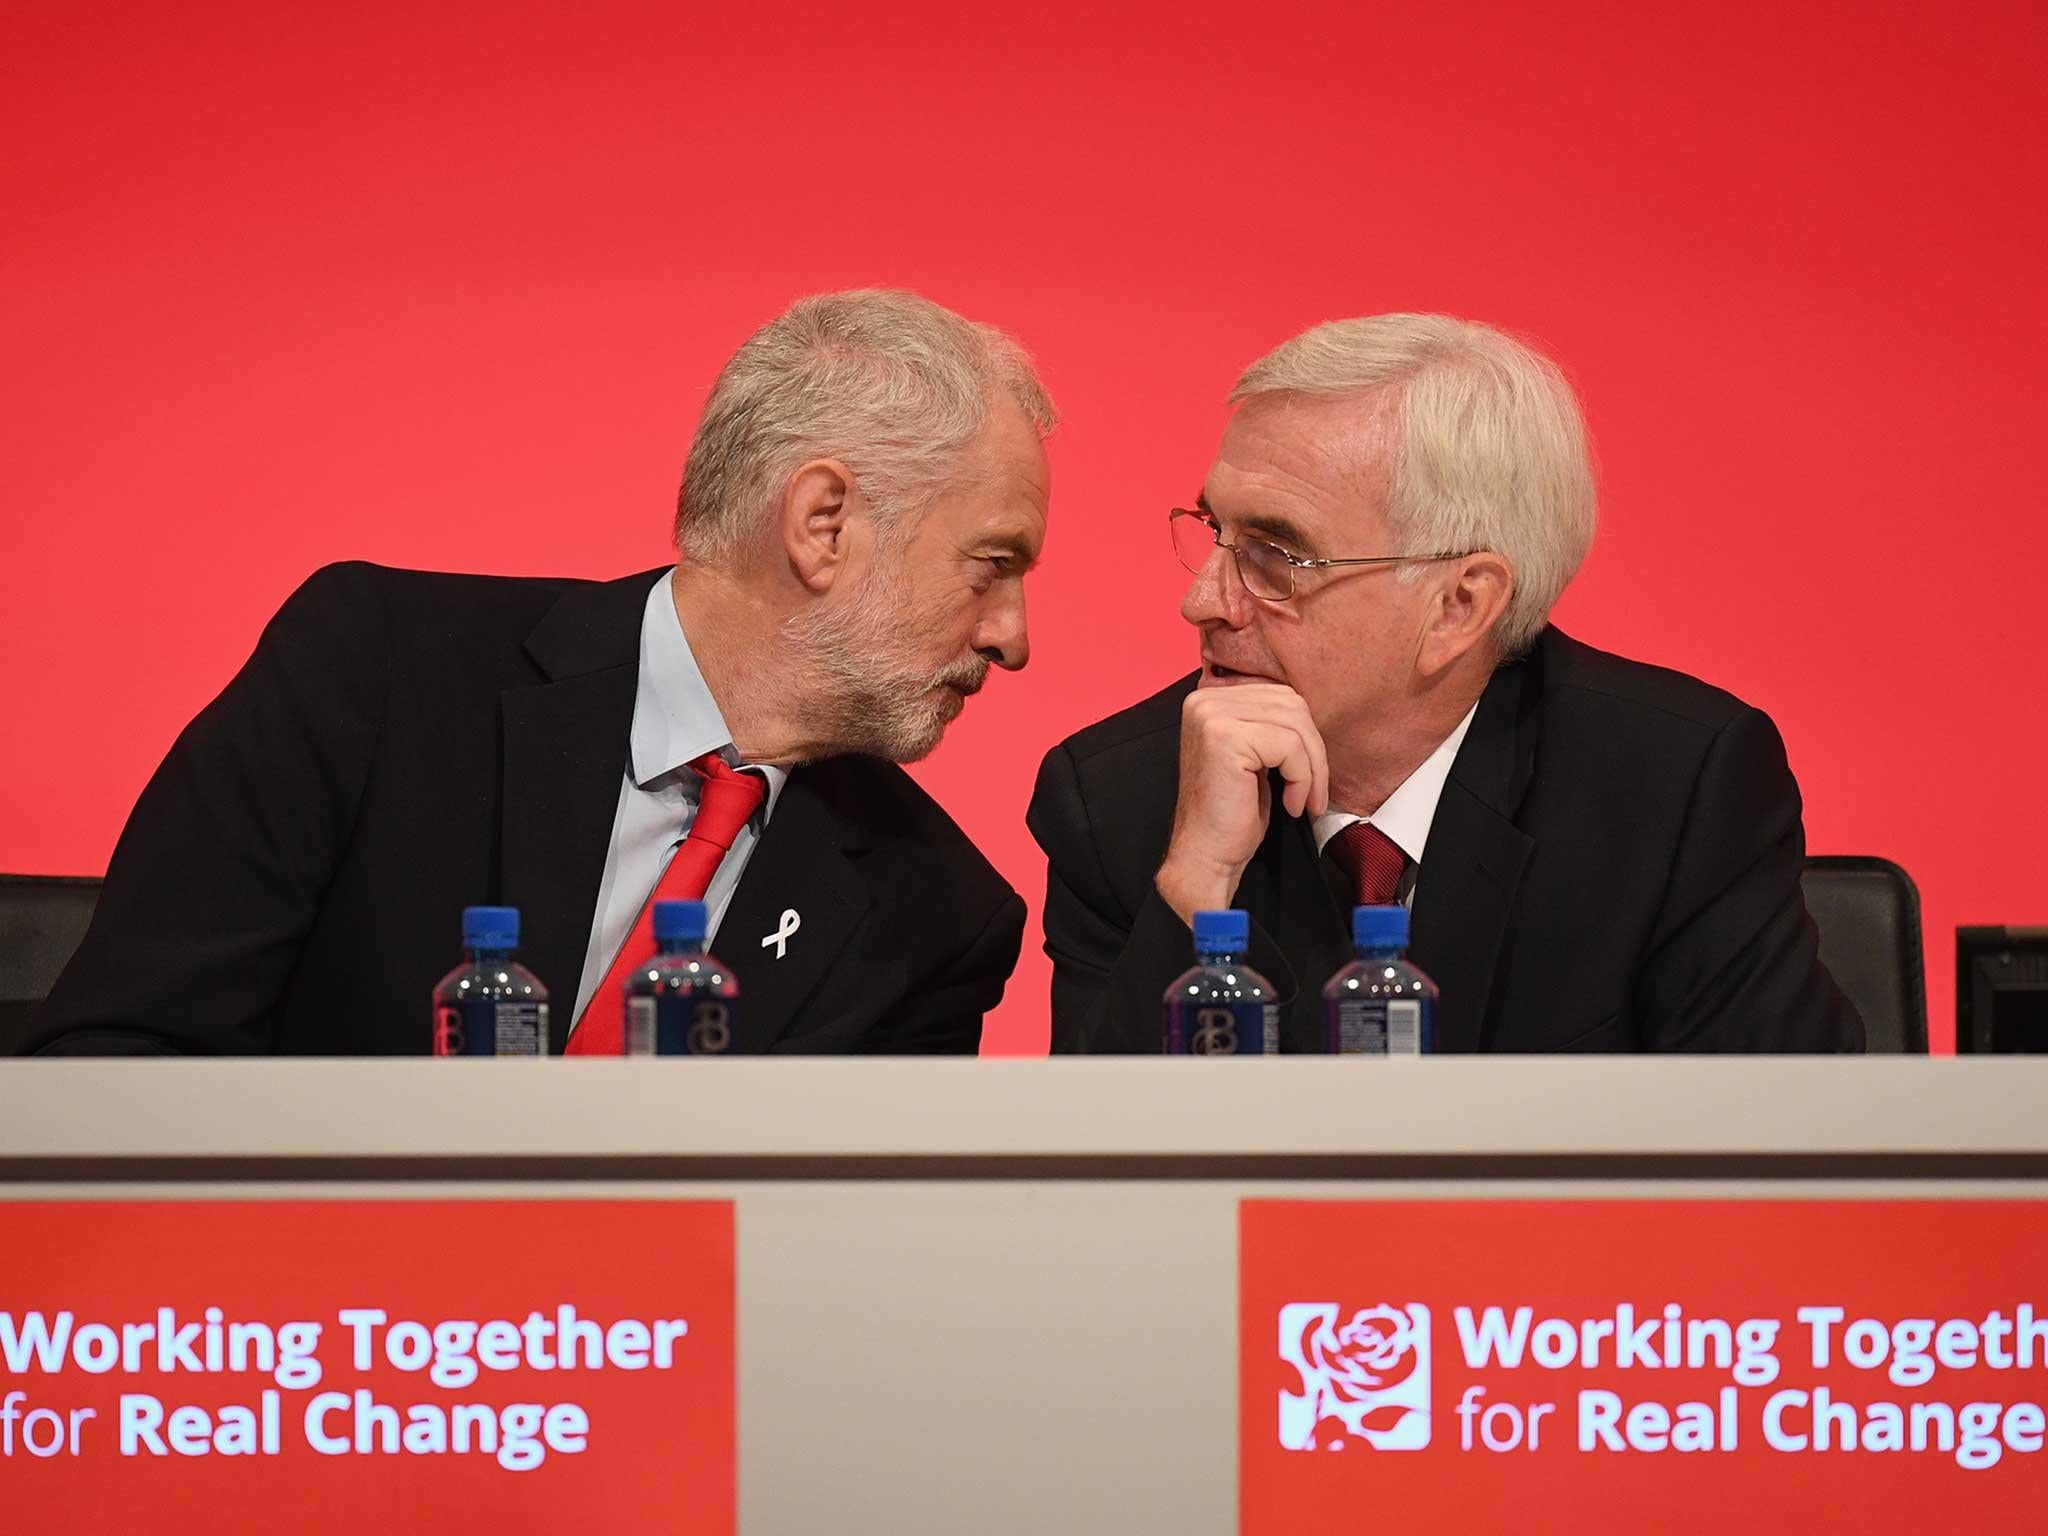 Labour Leader Jeremy Corbyn talks with Shadow Chancellor John McDonnell during the Labour Party Conference in Liverpool